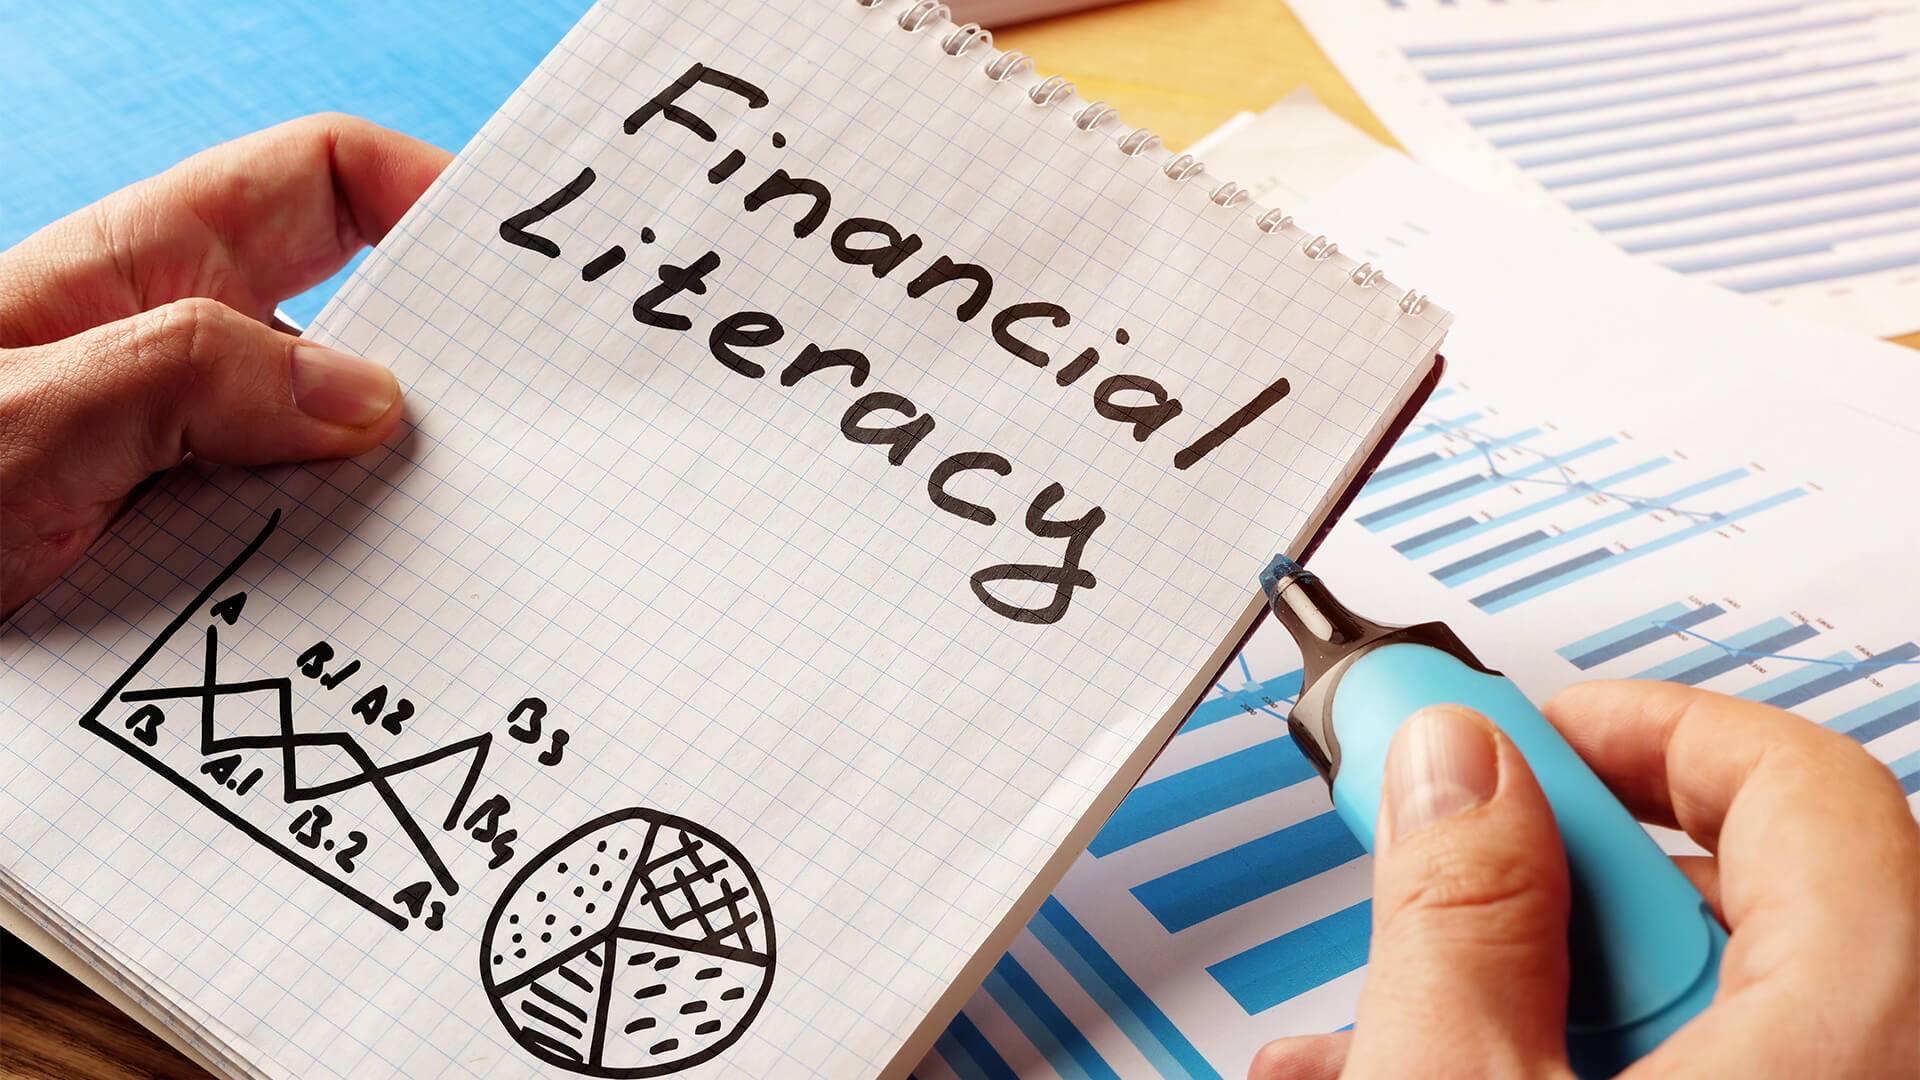 financial literacy in education process literature study